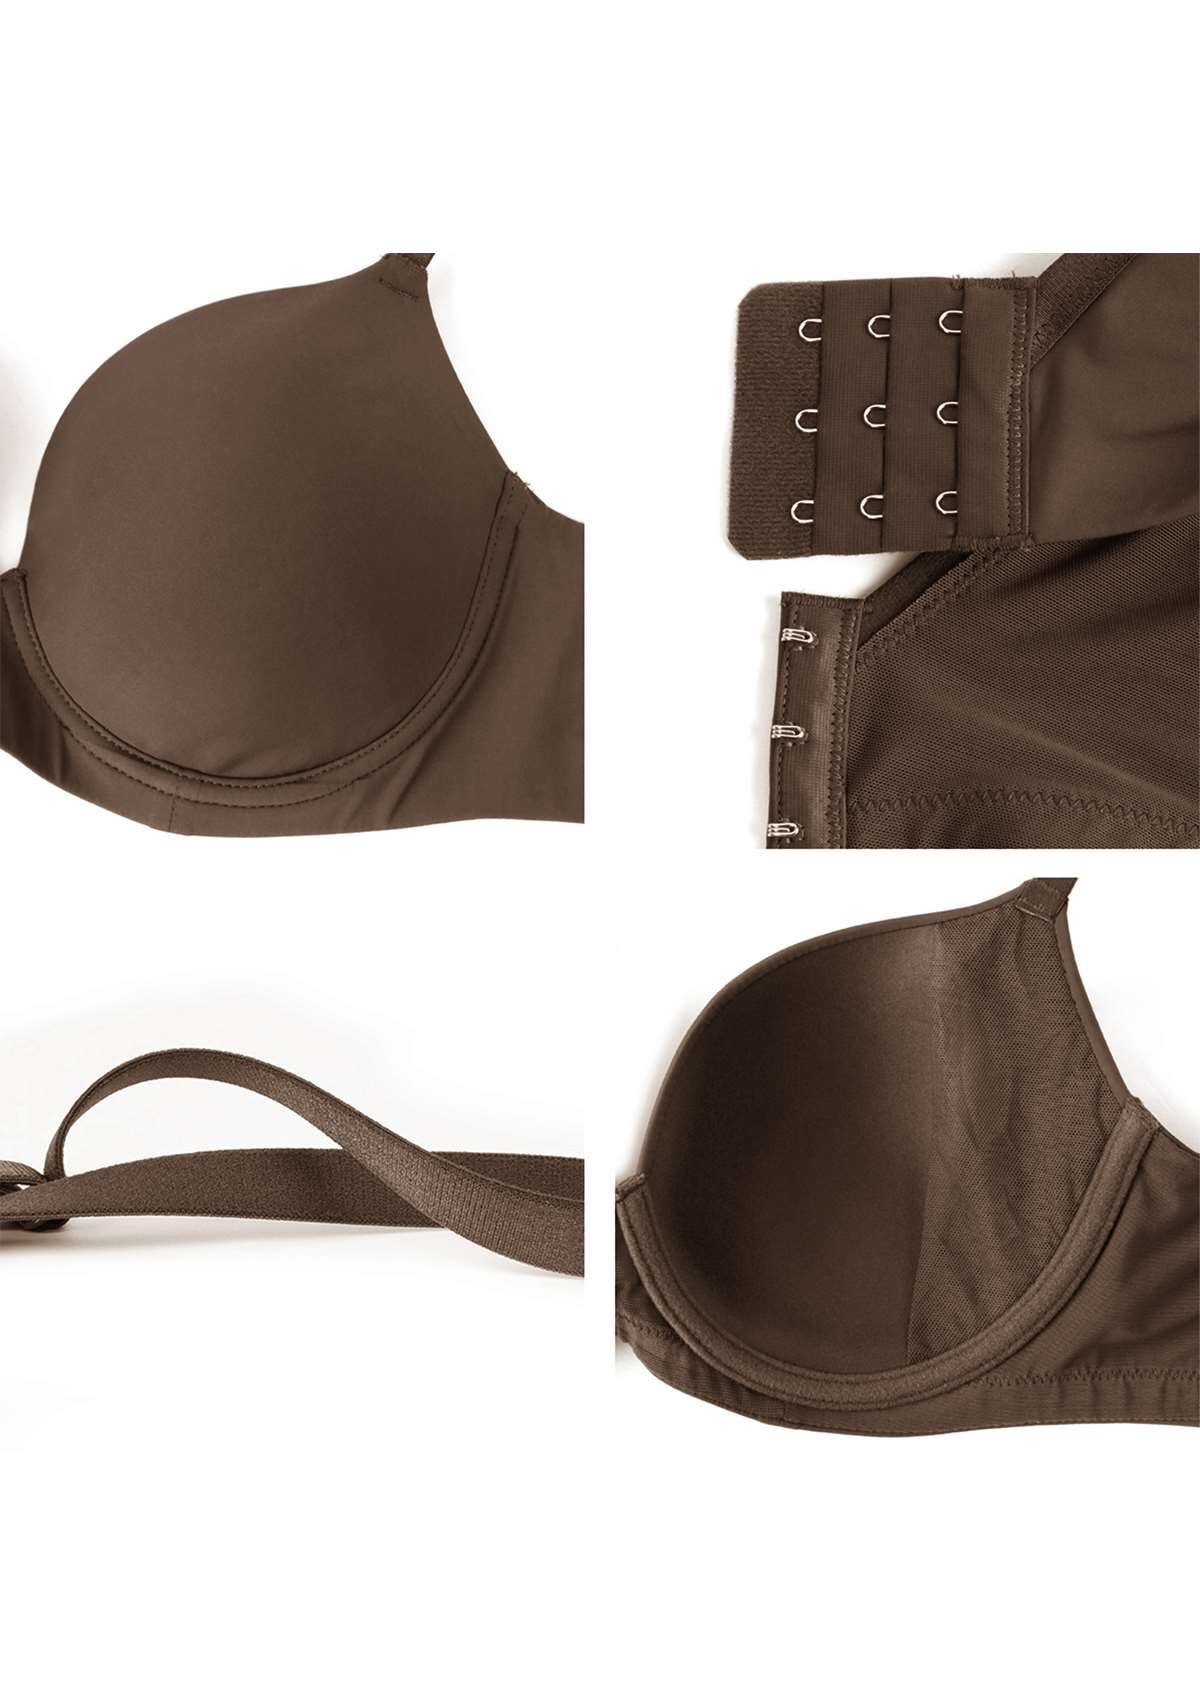 HSIA Gemma Smooth Supportive Padded T-shirt Bra - For Full Figures - Cocoa Brown / 38 / DDD/F